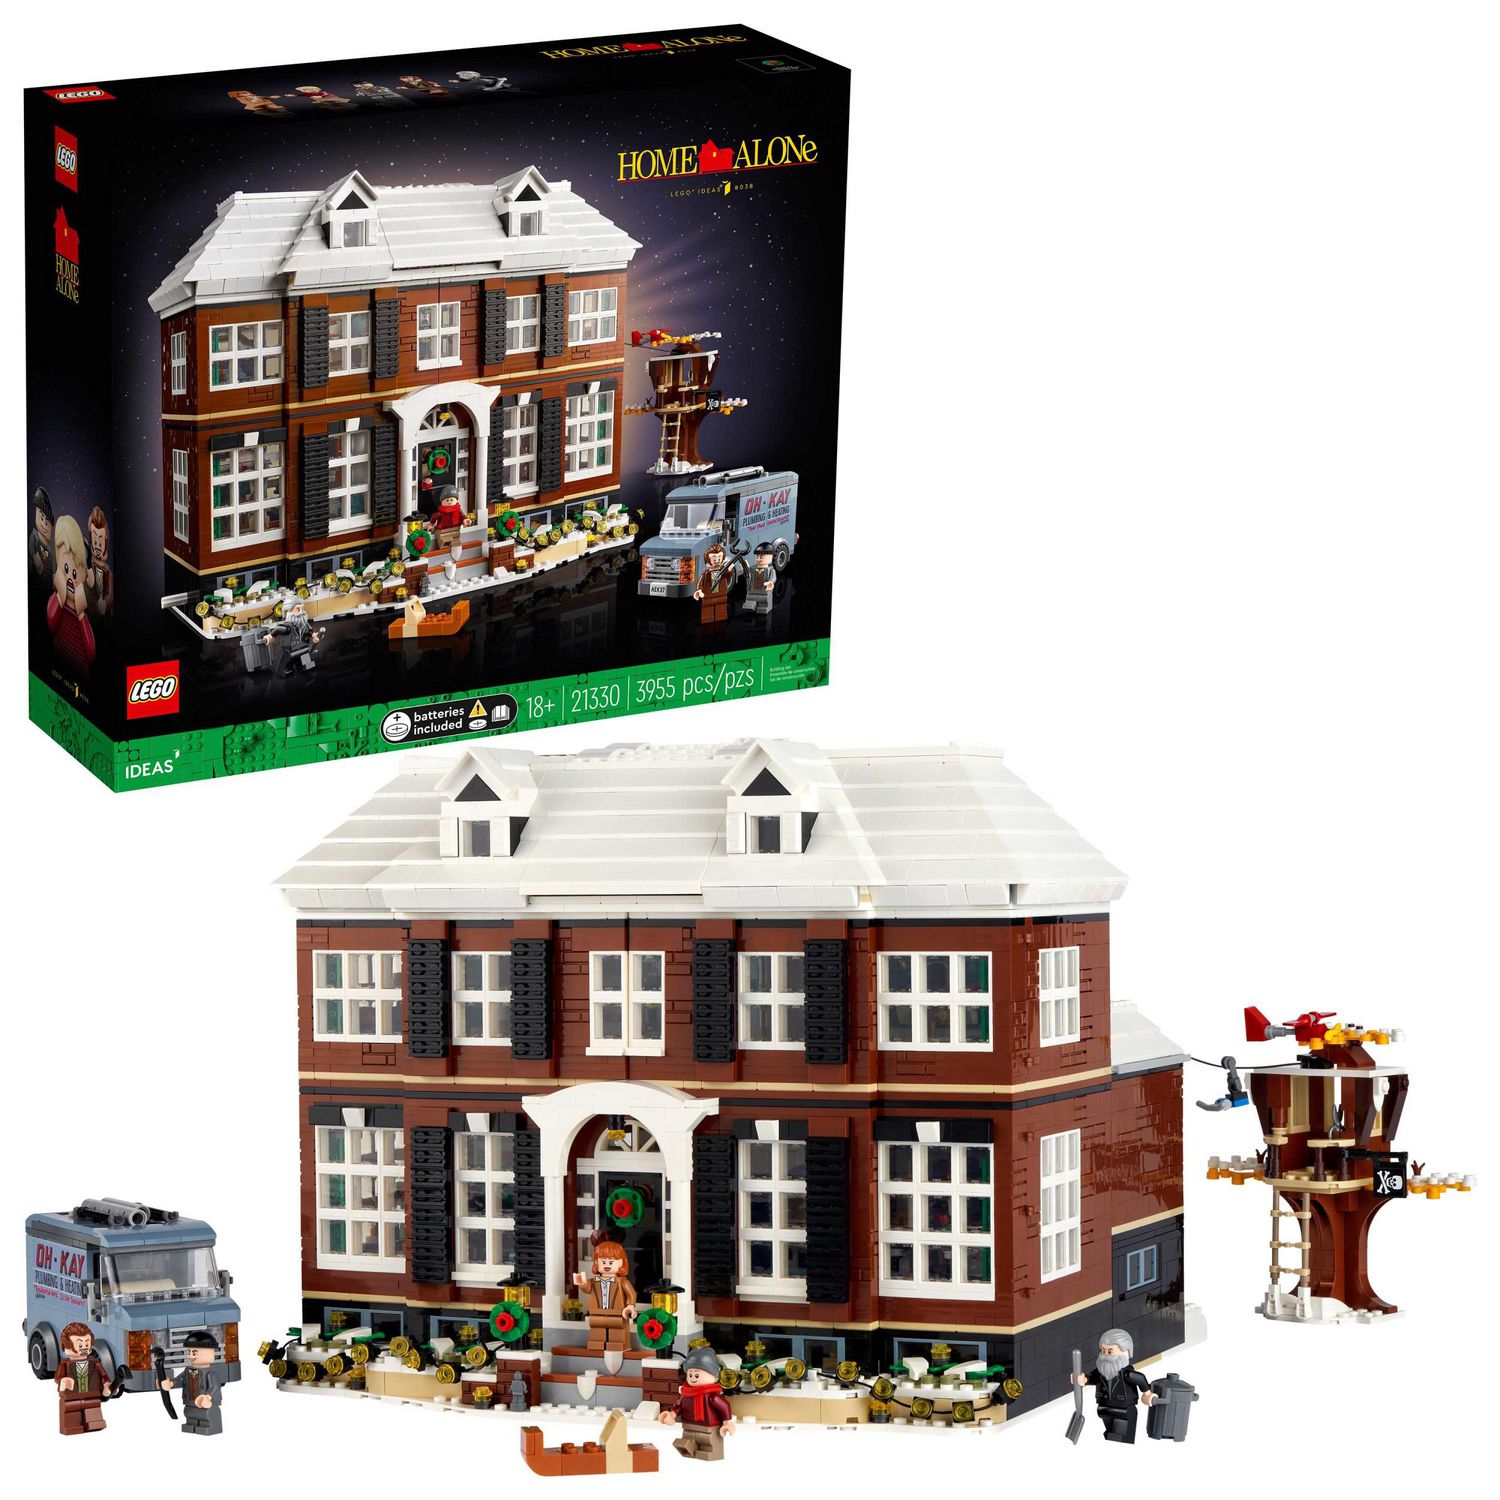 LEGO Ideas Alone 21330 Toy Building Top Holiday Gift for Adults (3,957 Pieces) | Walmart Canada